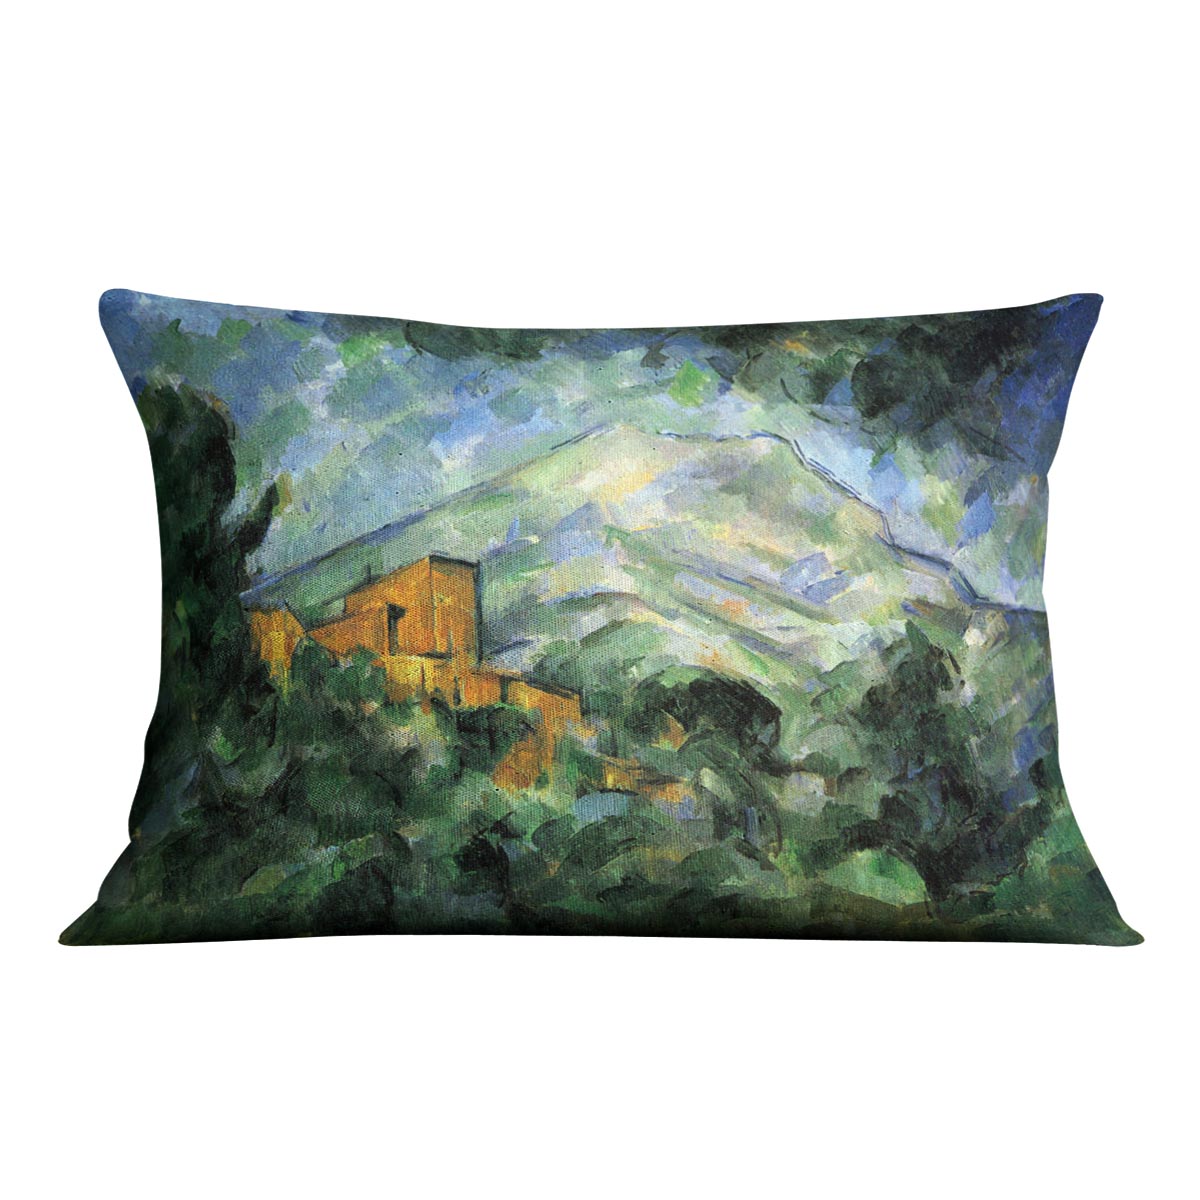 St. Victoire and Chateau Noir by Cezanne Cushion